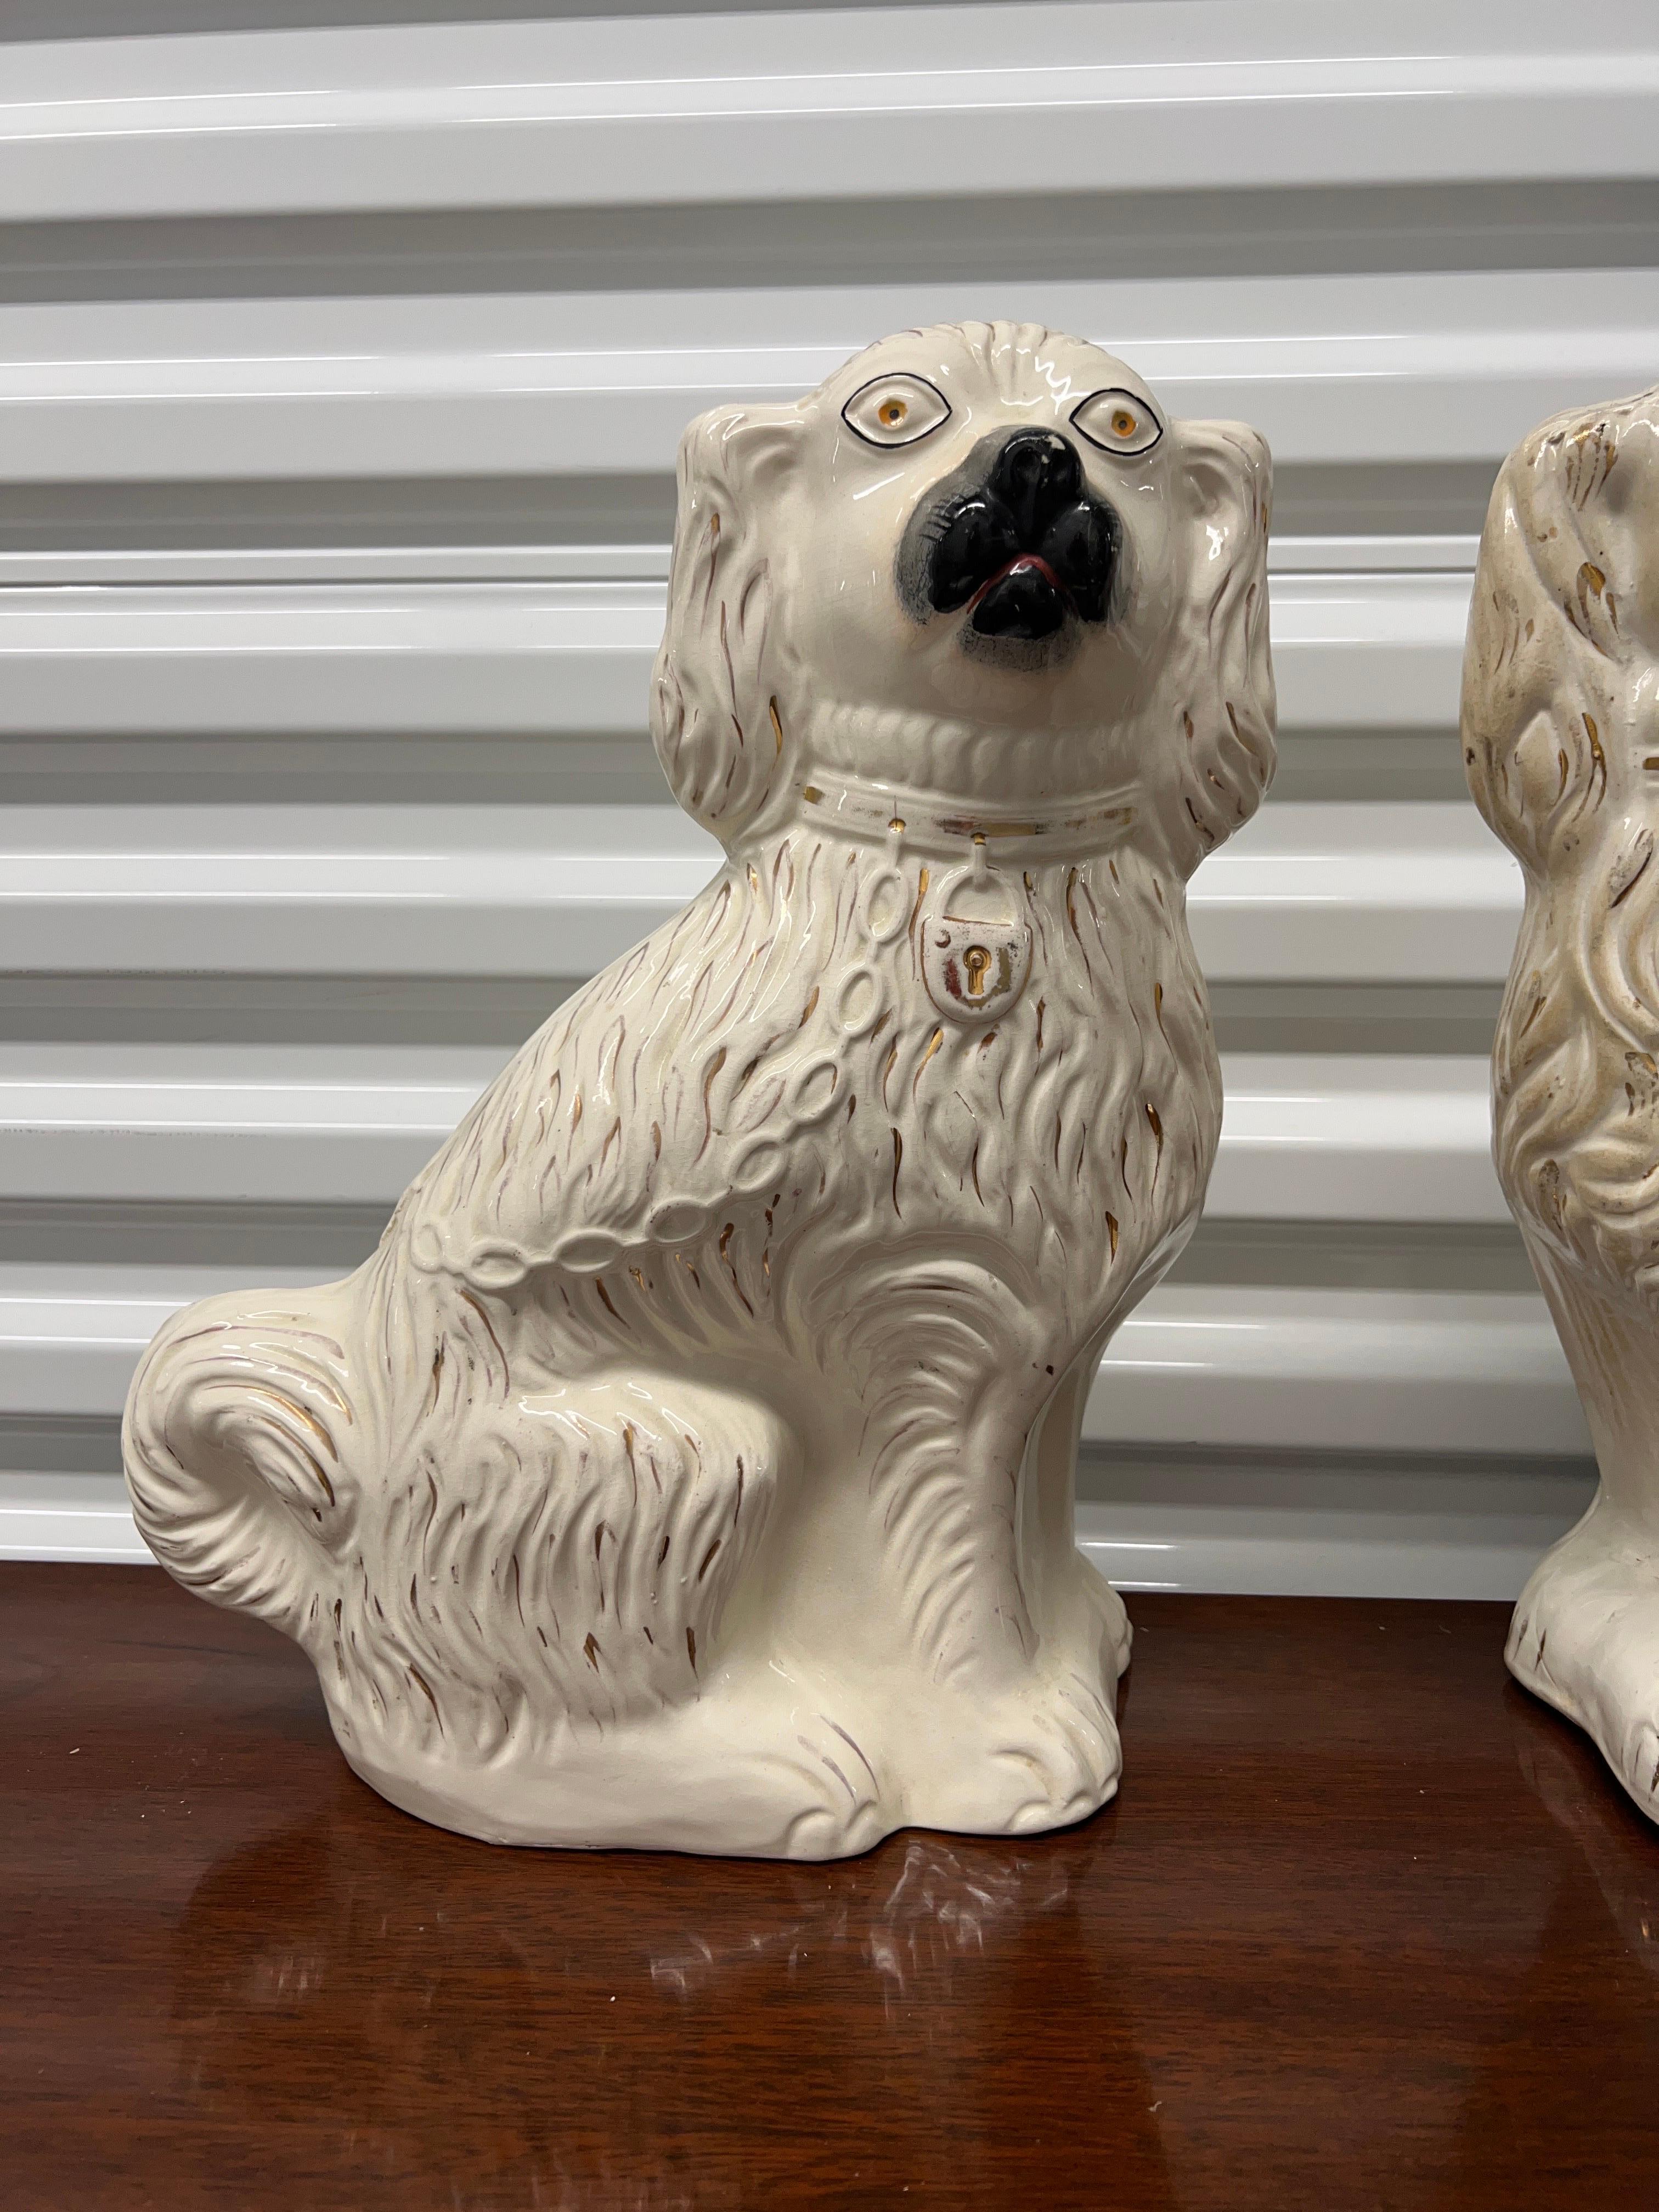 English, 19th century.

A pair of English Staffordshire spaniels in white glaze, black nose and key lock chain to body. 15.25